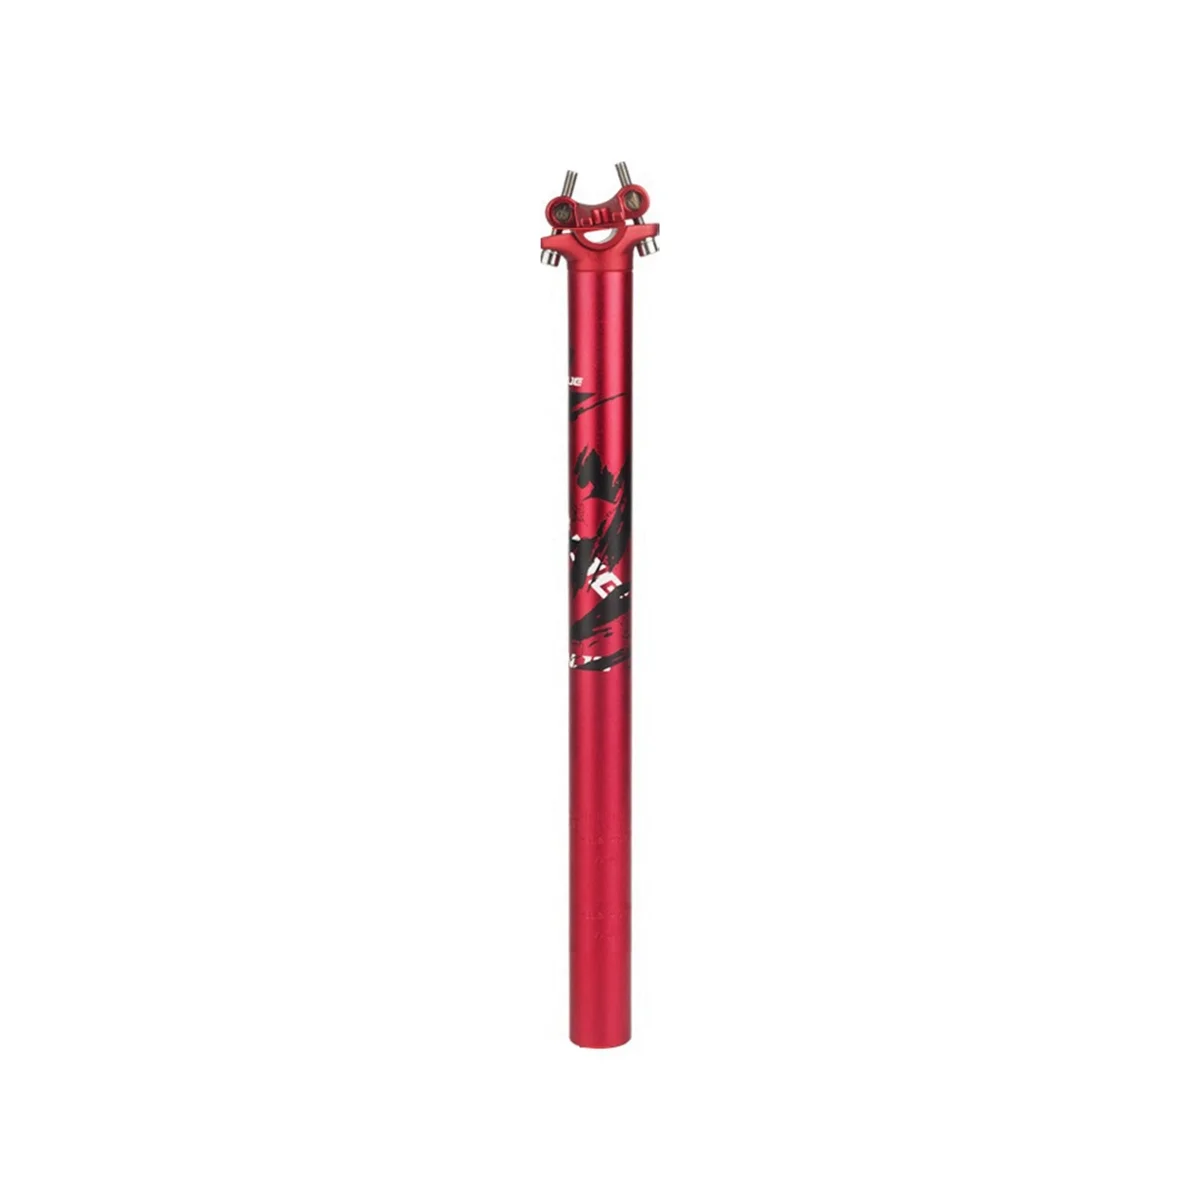 

LUNJE Aluminum Alloy Seat Tube for Mountain Bike and Bicycle Seat Rod,30.9X400mm,Red